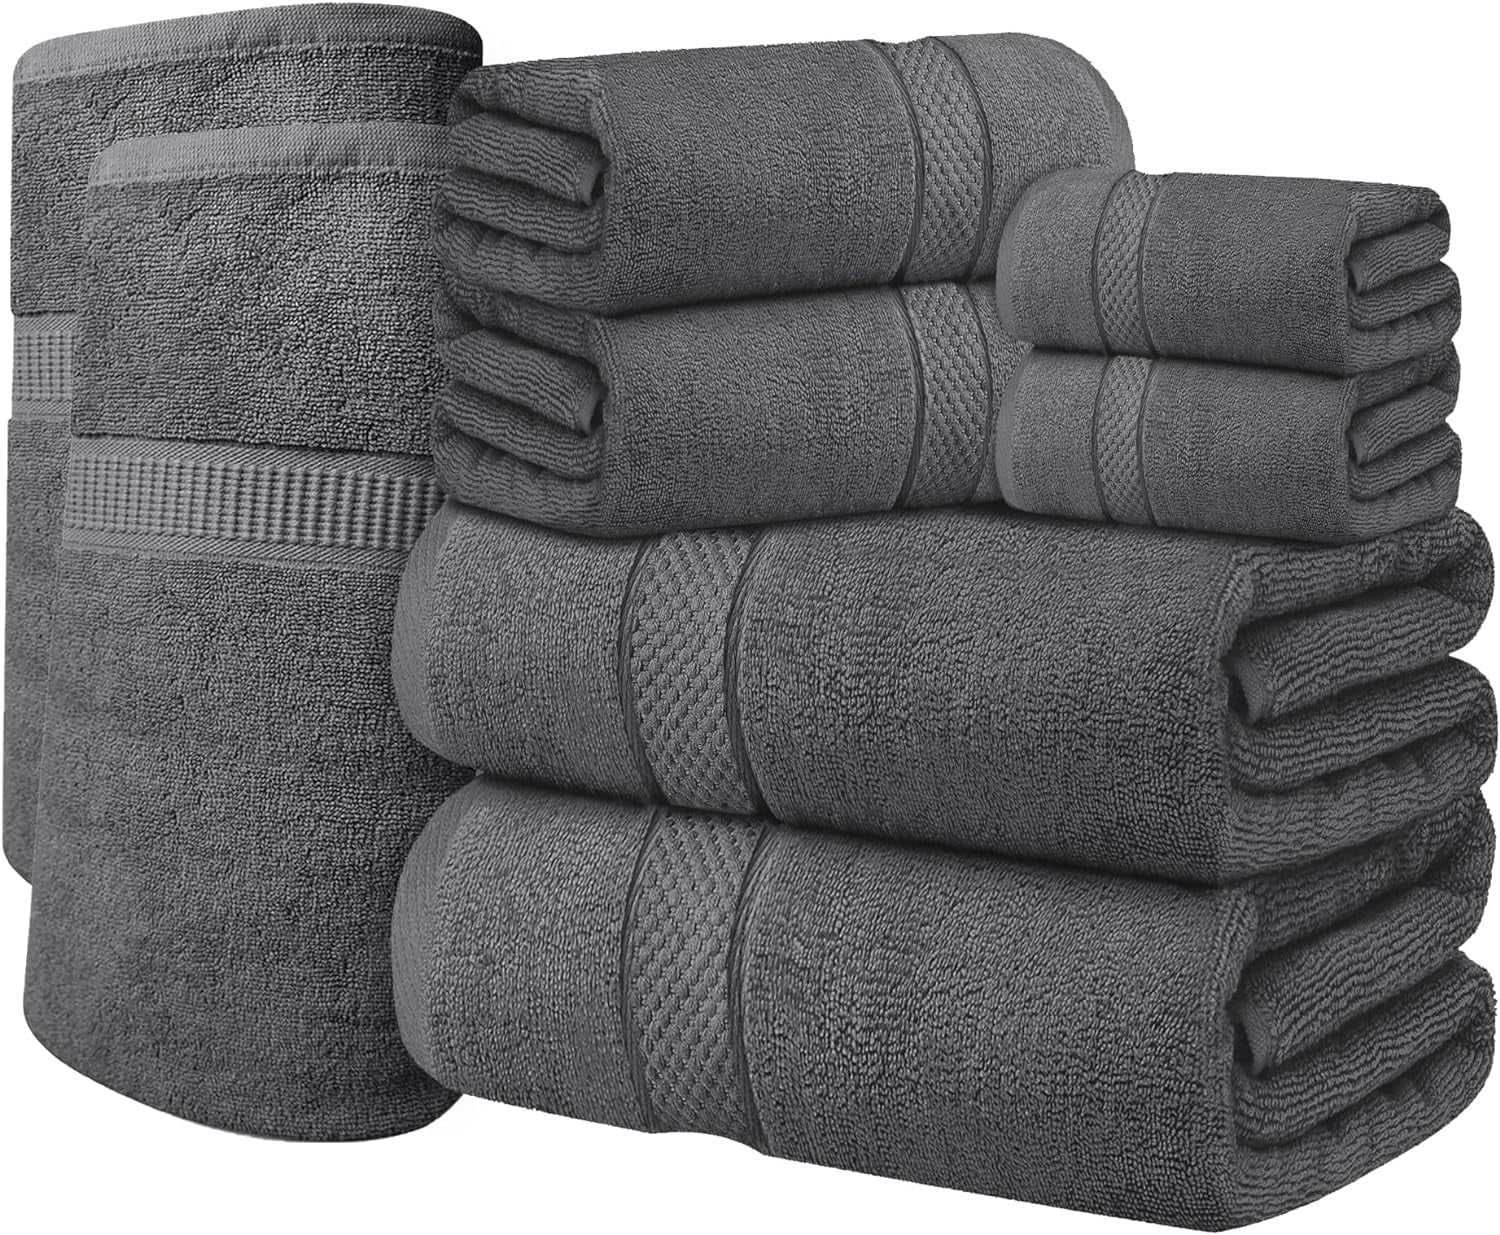 Perfehair Black Cotton Salon Towels - 16x27 2-Pack for Barbers & Gym